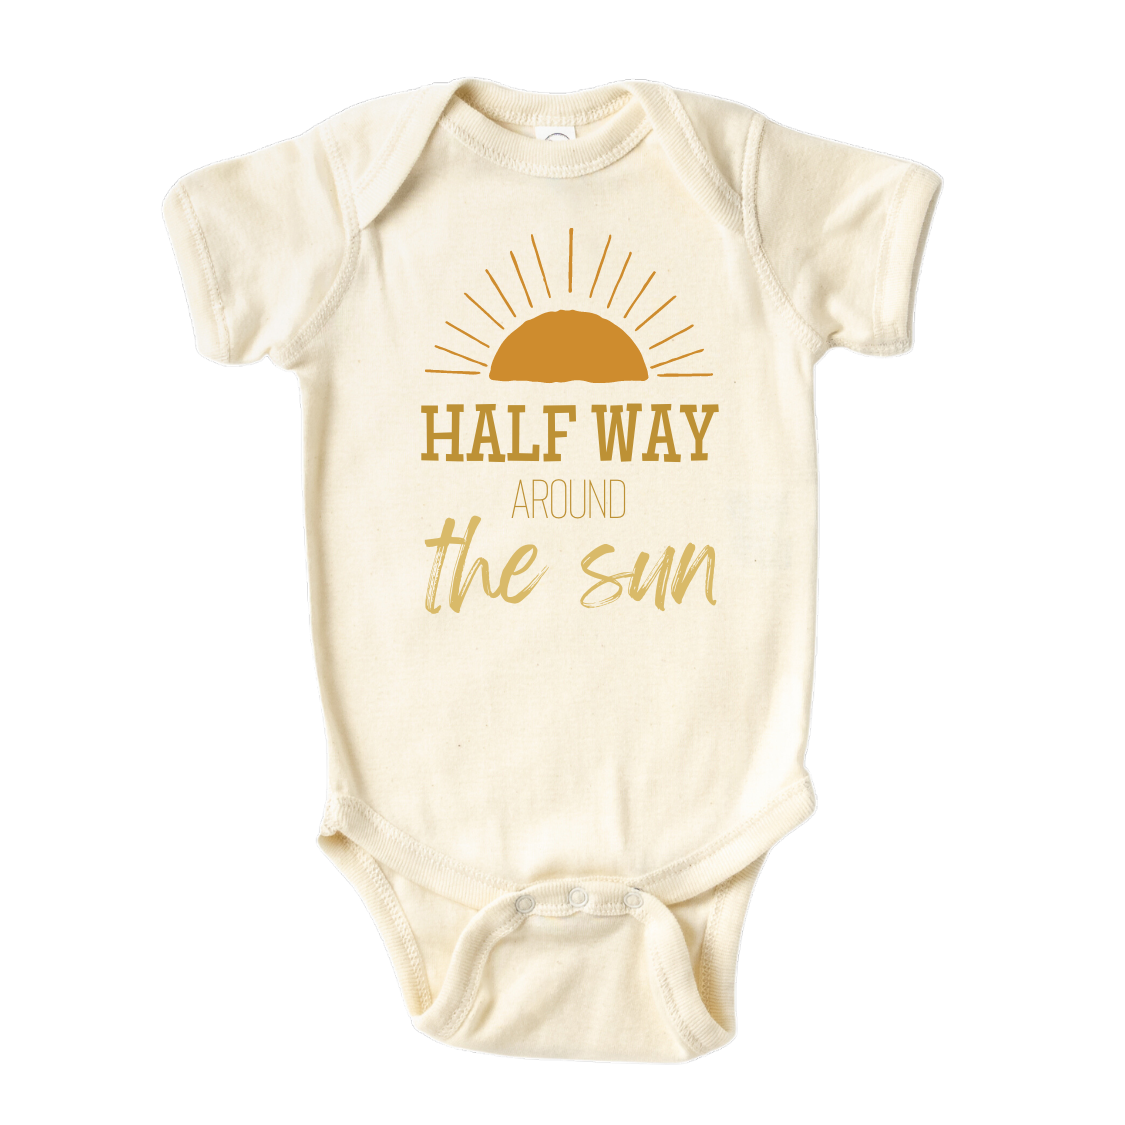 newborn onesies baby girl onesies funny baby onesies baby announcement onesie personalized baby girl gifts custom baby onesie infant clothes cute baby girl clothes